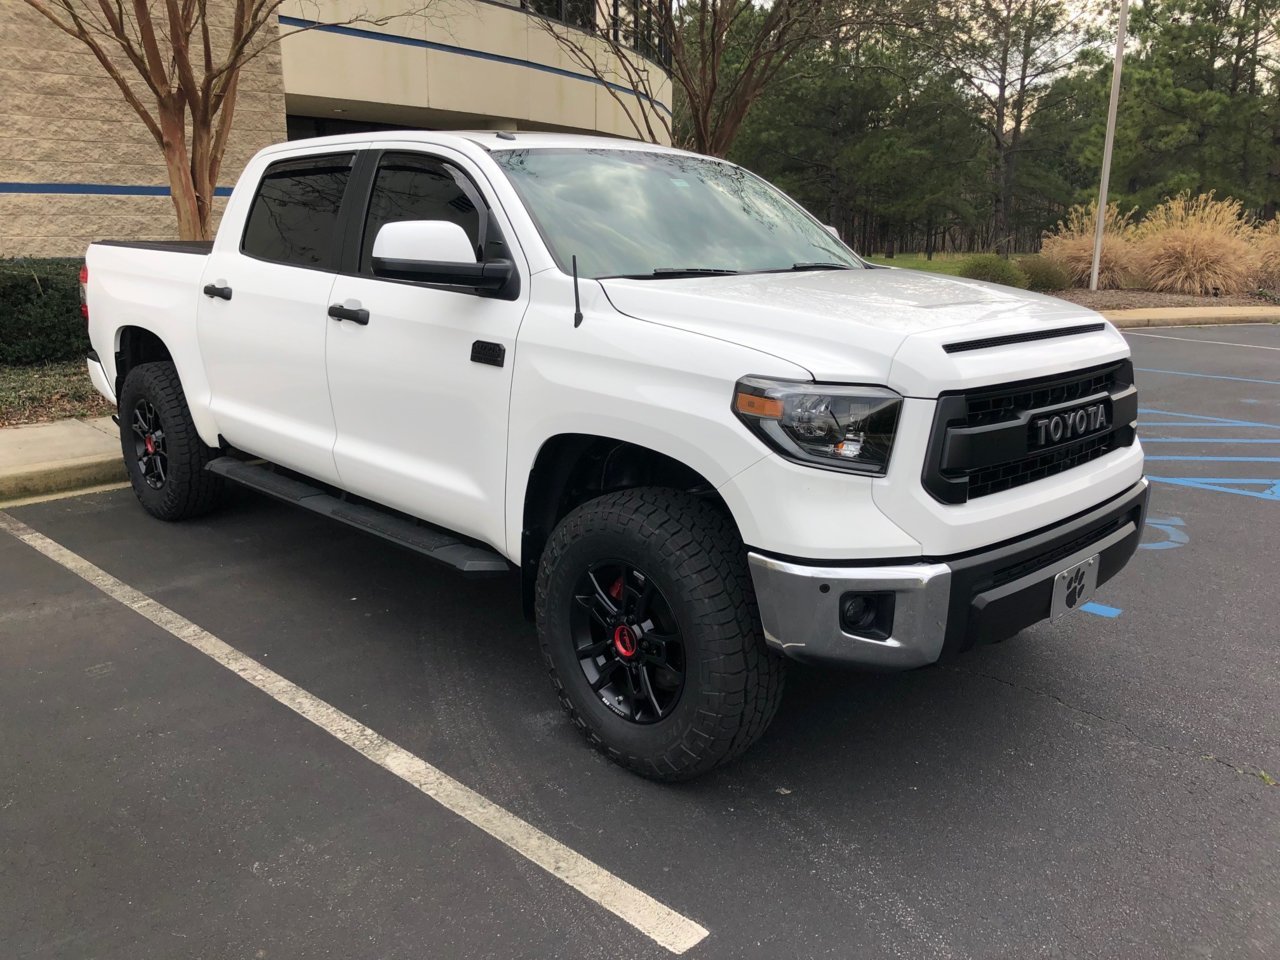 So which wheels look better? | Toyota Tundra Forum